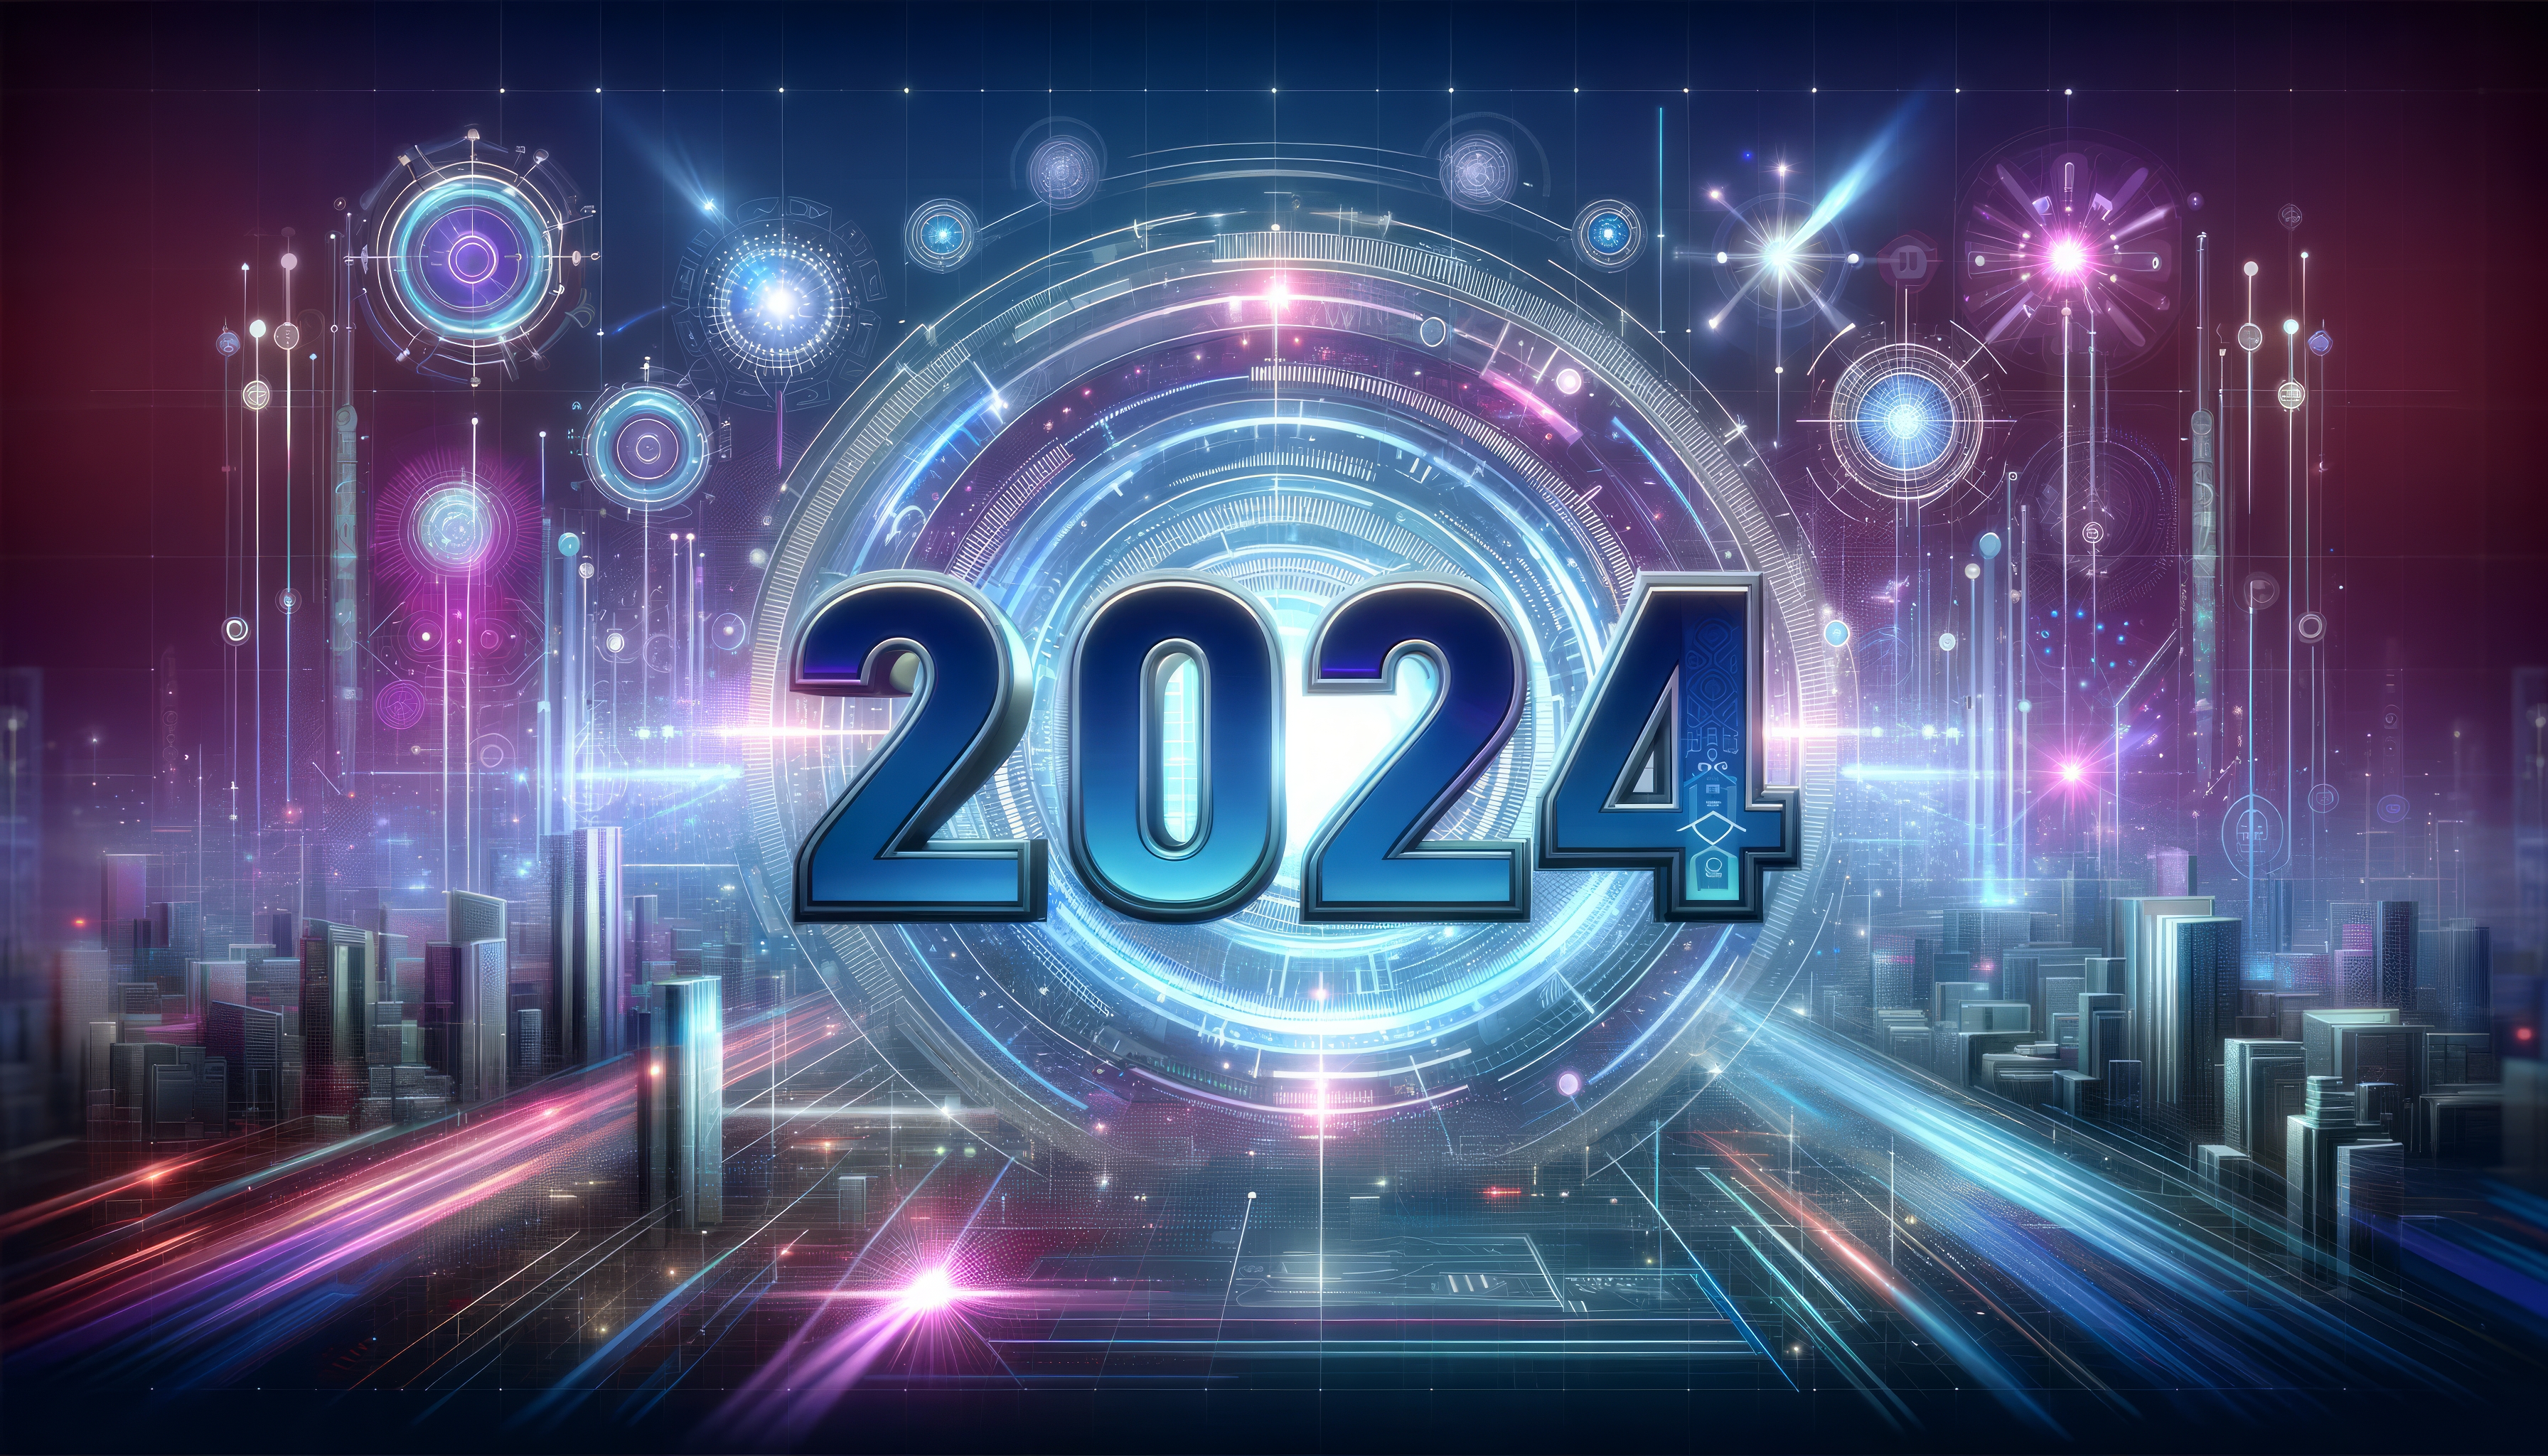 Futuristic 2024 themed HD wallpaper depicting a vibrant digital cityscape with glowing neon lights and high-tech interface elements.